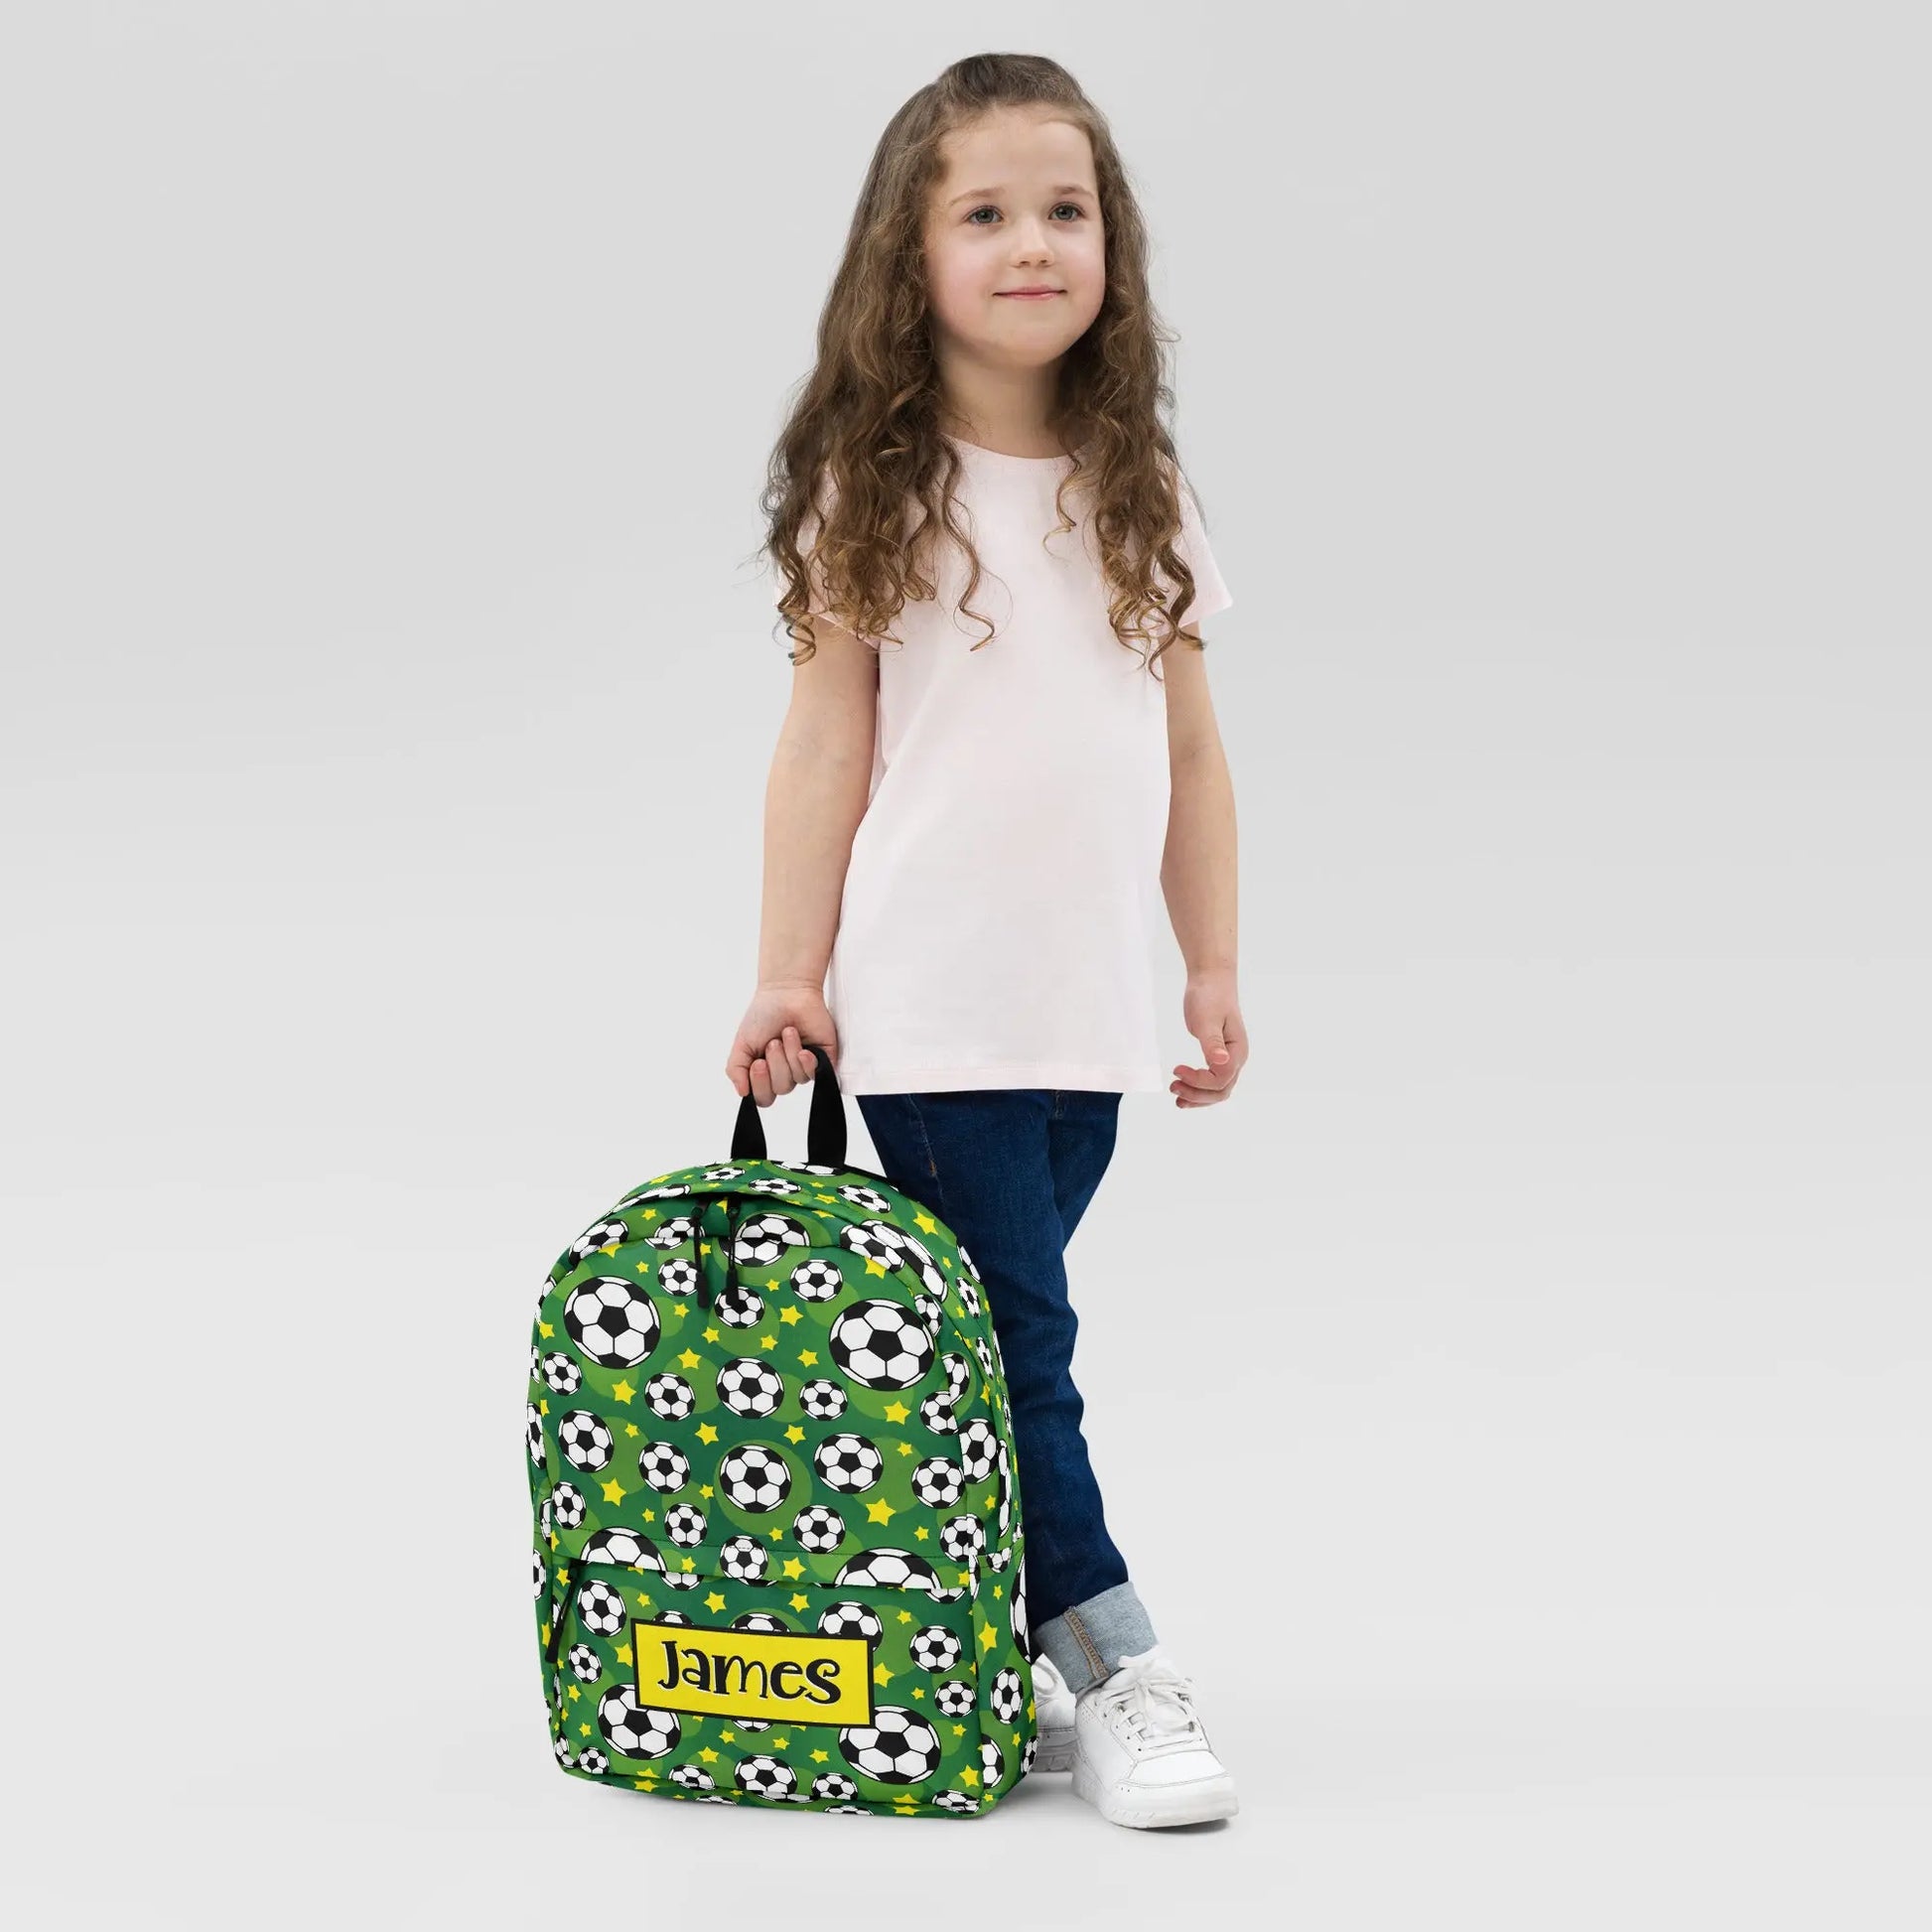 Soccer Personalized Backpack Amazing Faith Designs